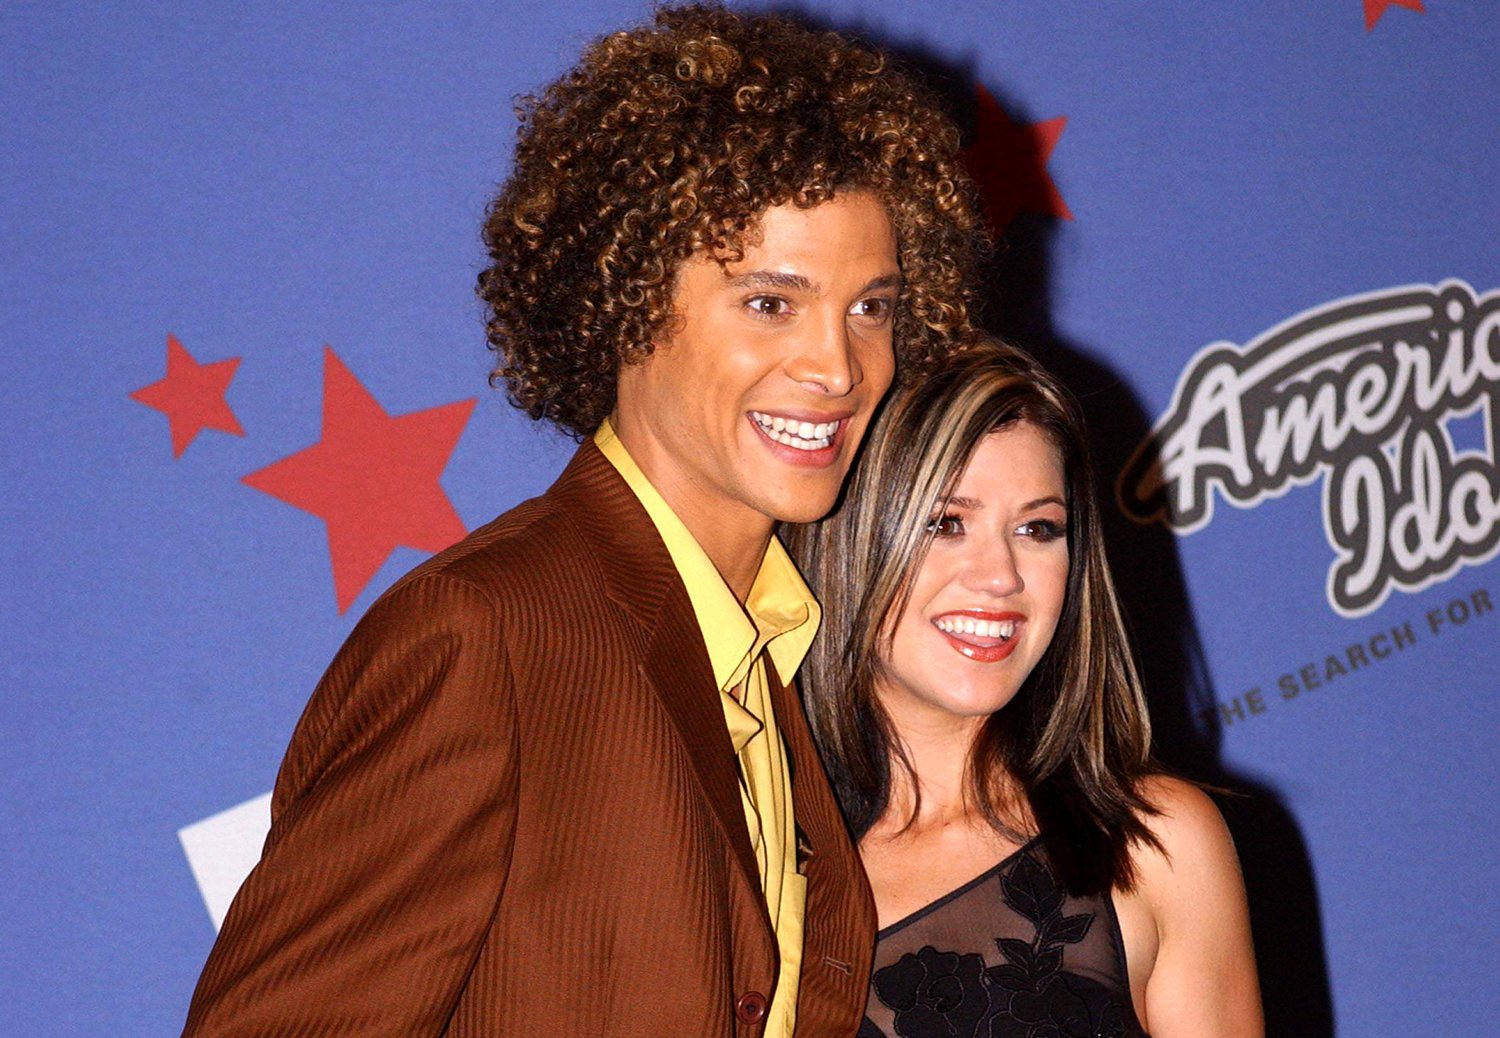 American Idol Season 1 runner-up Justin Guarini and winner Kelly Clarkson pose together in 2002